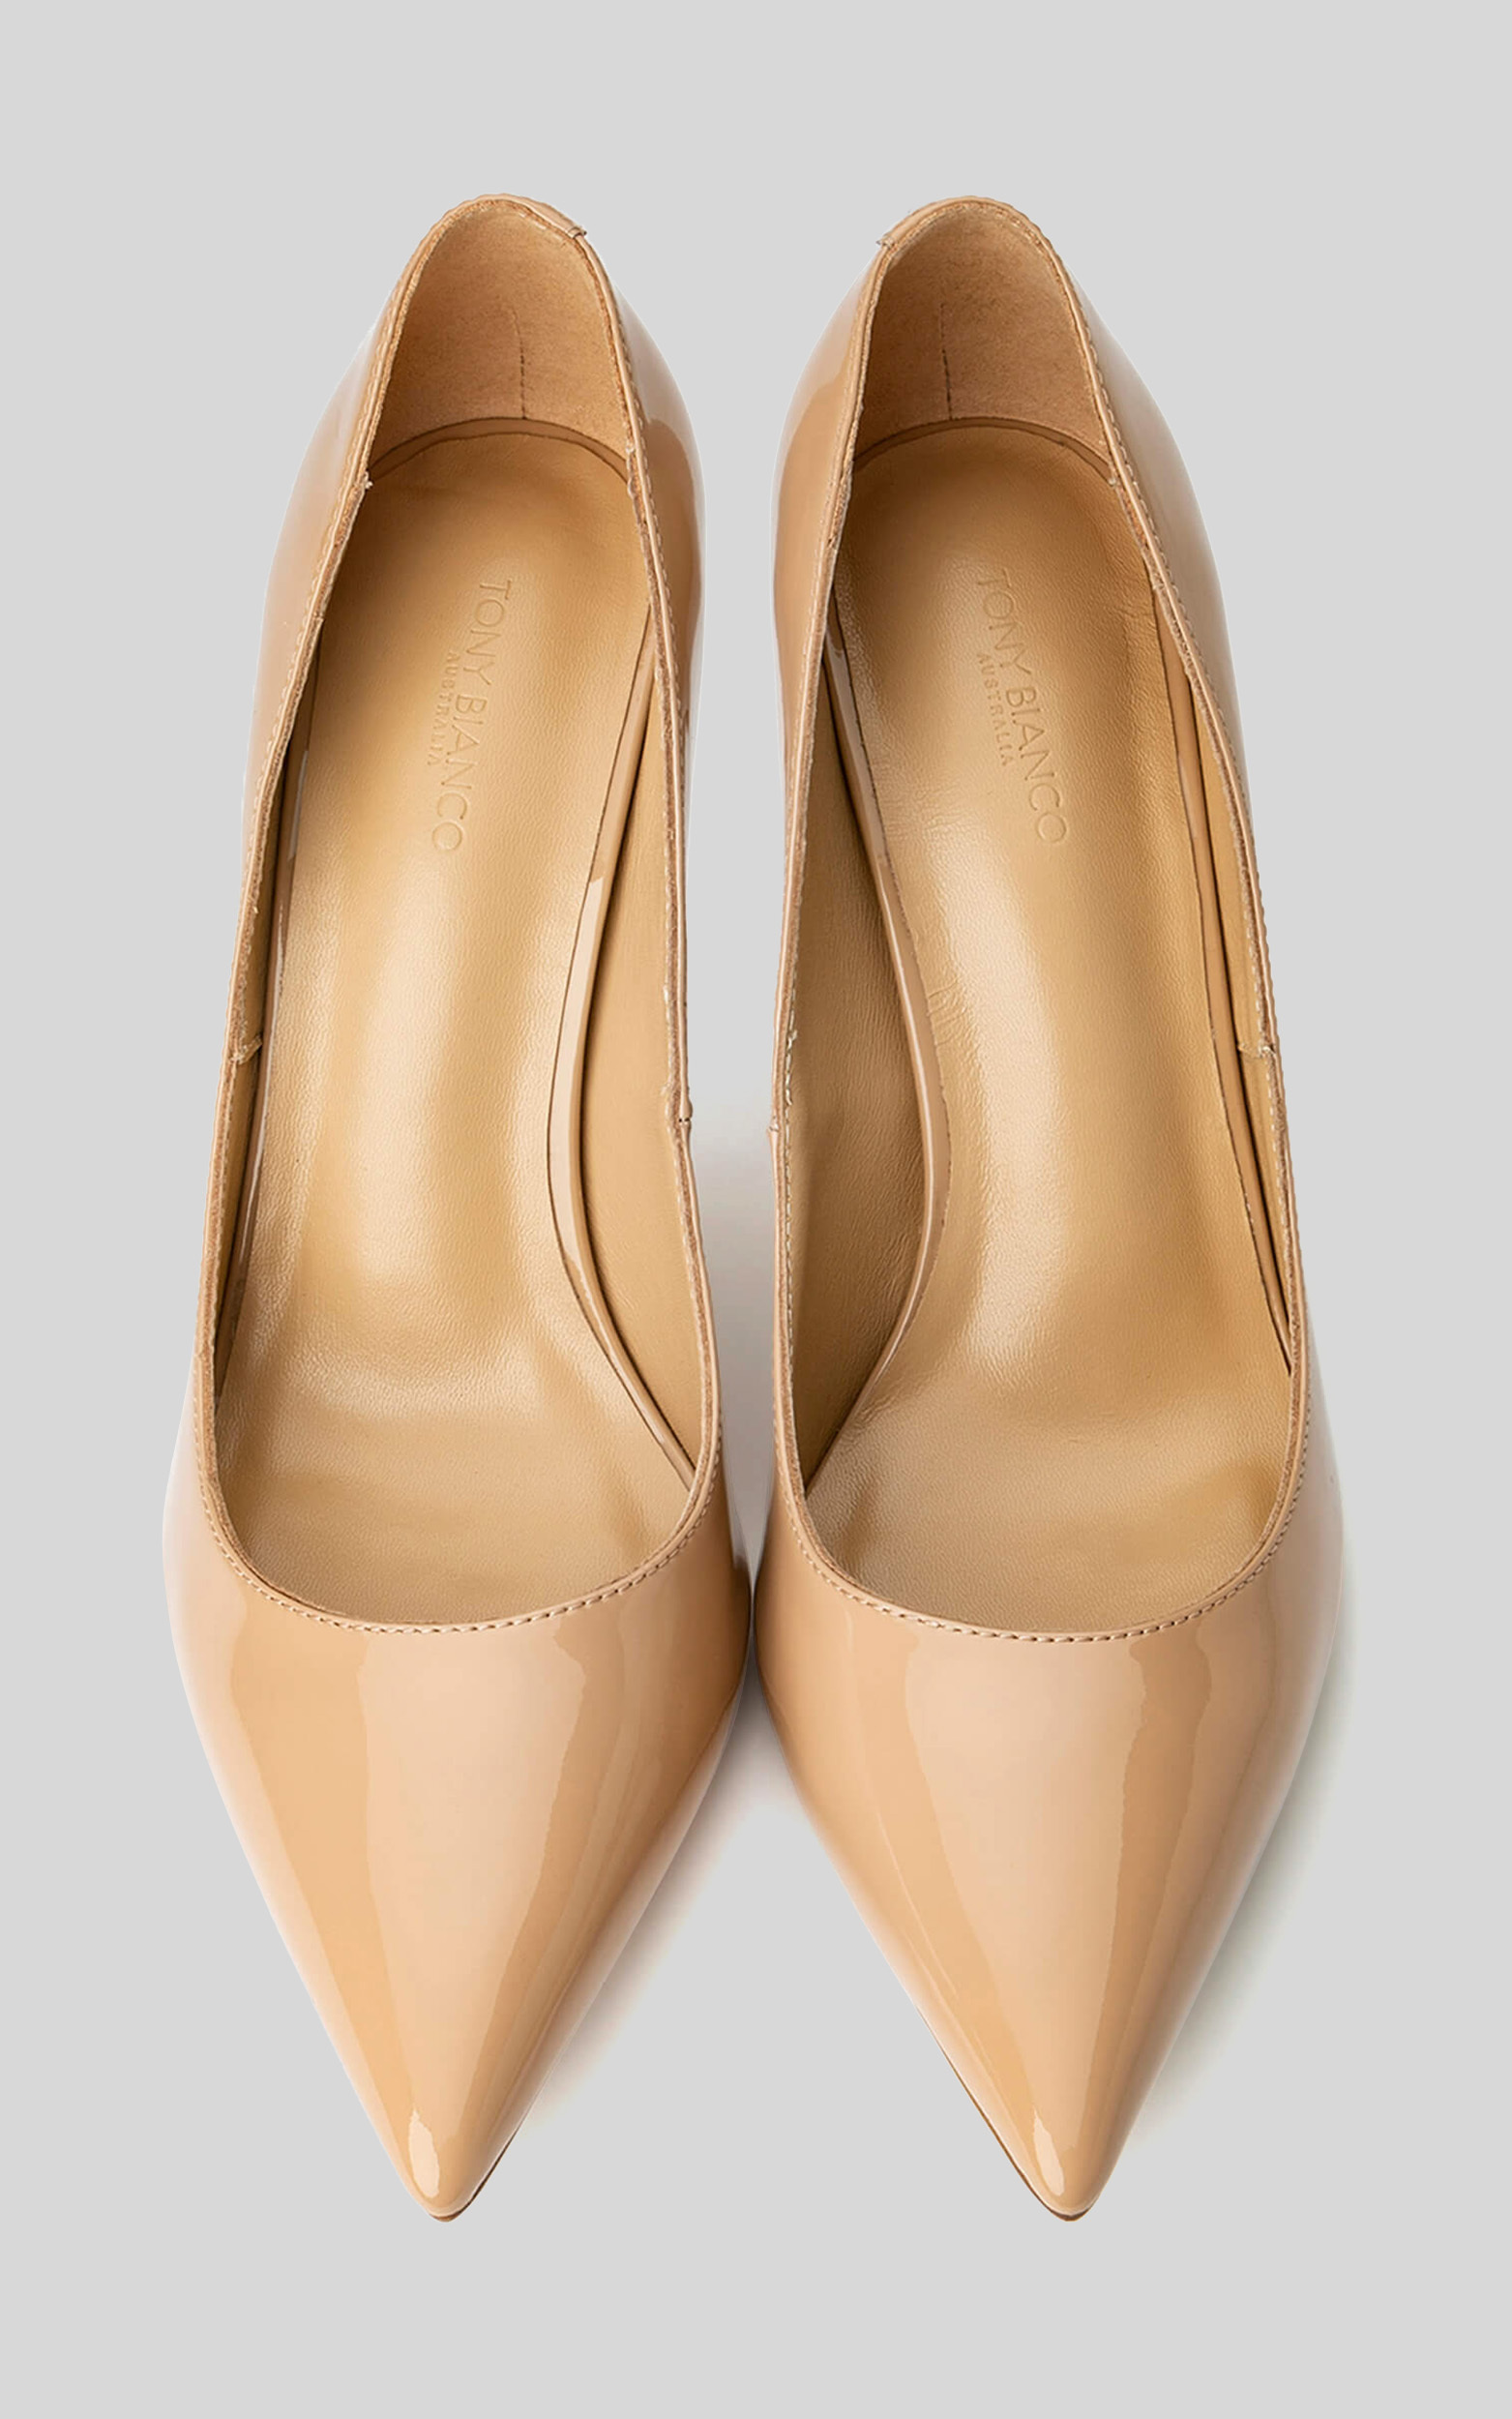 TONY BIANCO - ANJA PUMPS in Nude Patent - 05, BRN2, hi-res image number null